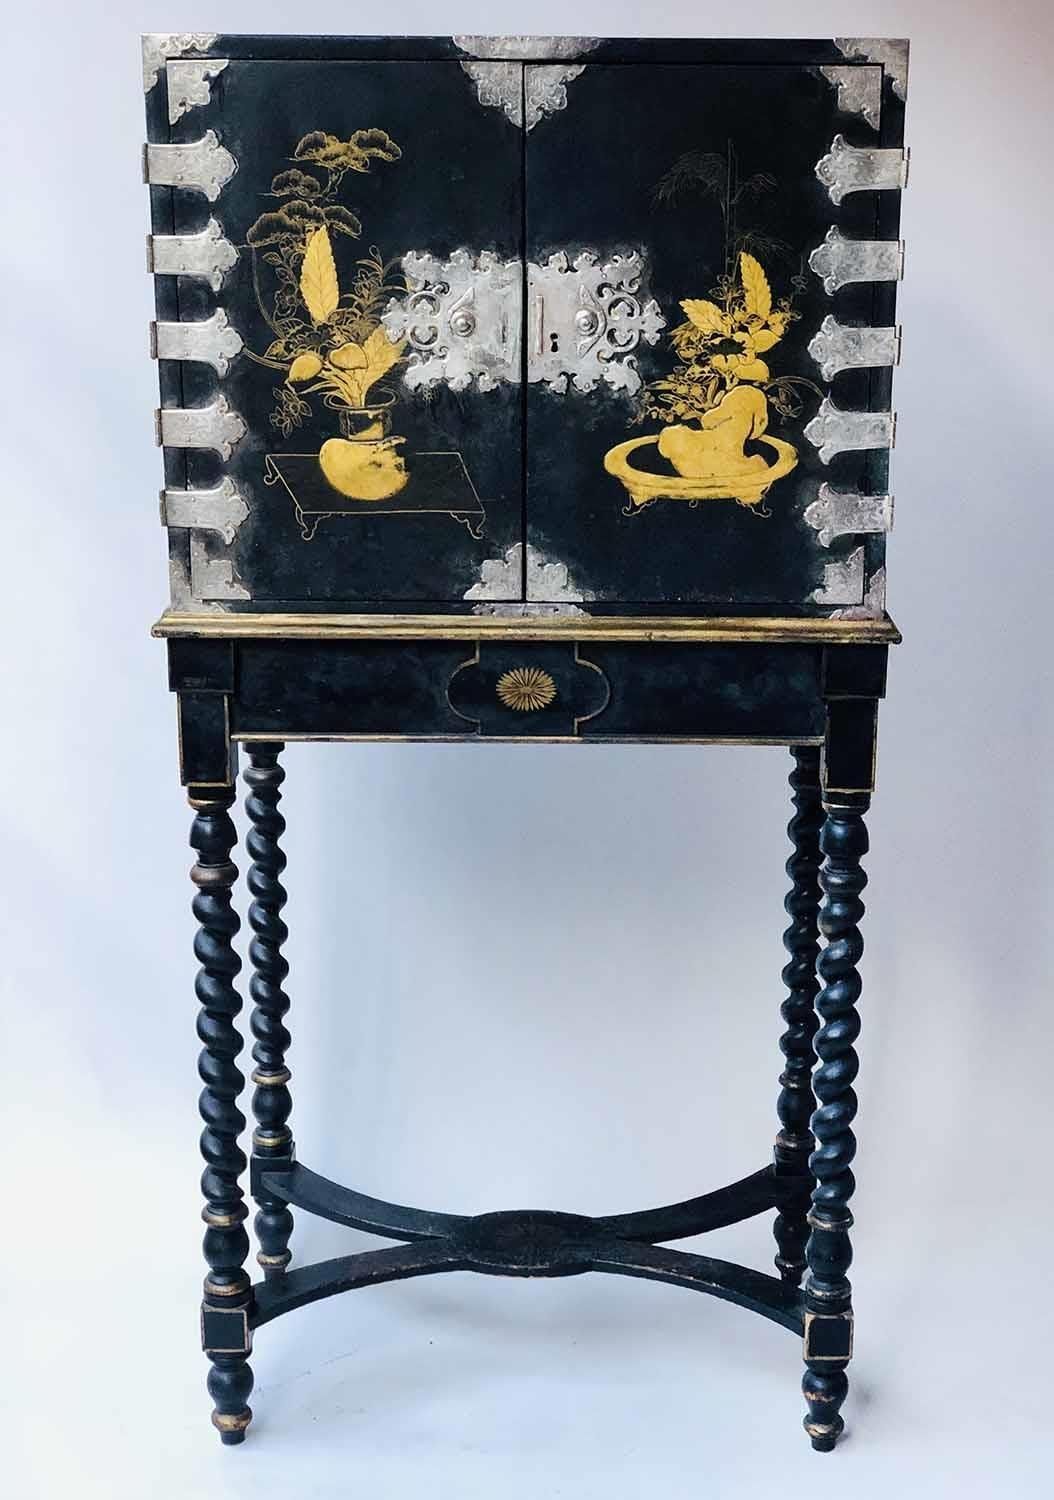 CABINET ON STAND, 18th century Chinese export decorated gilt and black lacquer with two doors